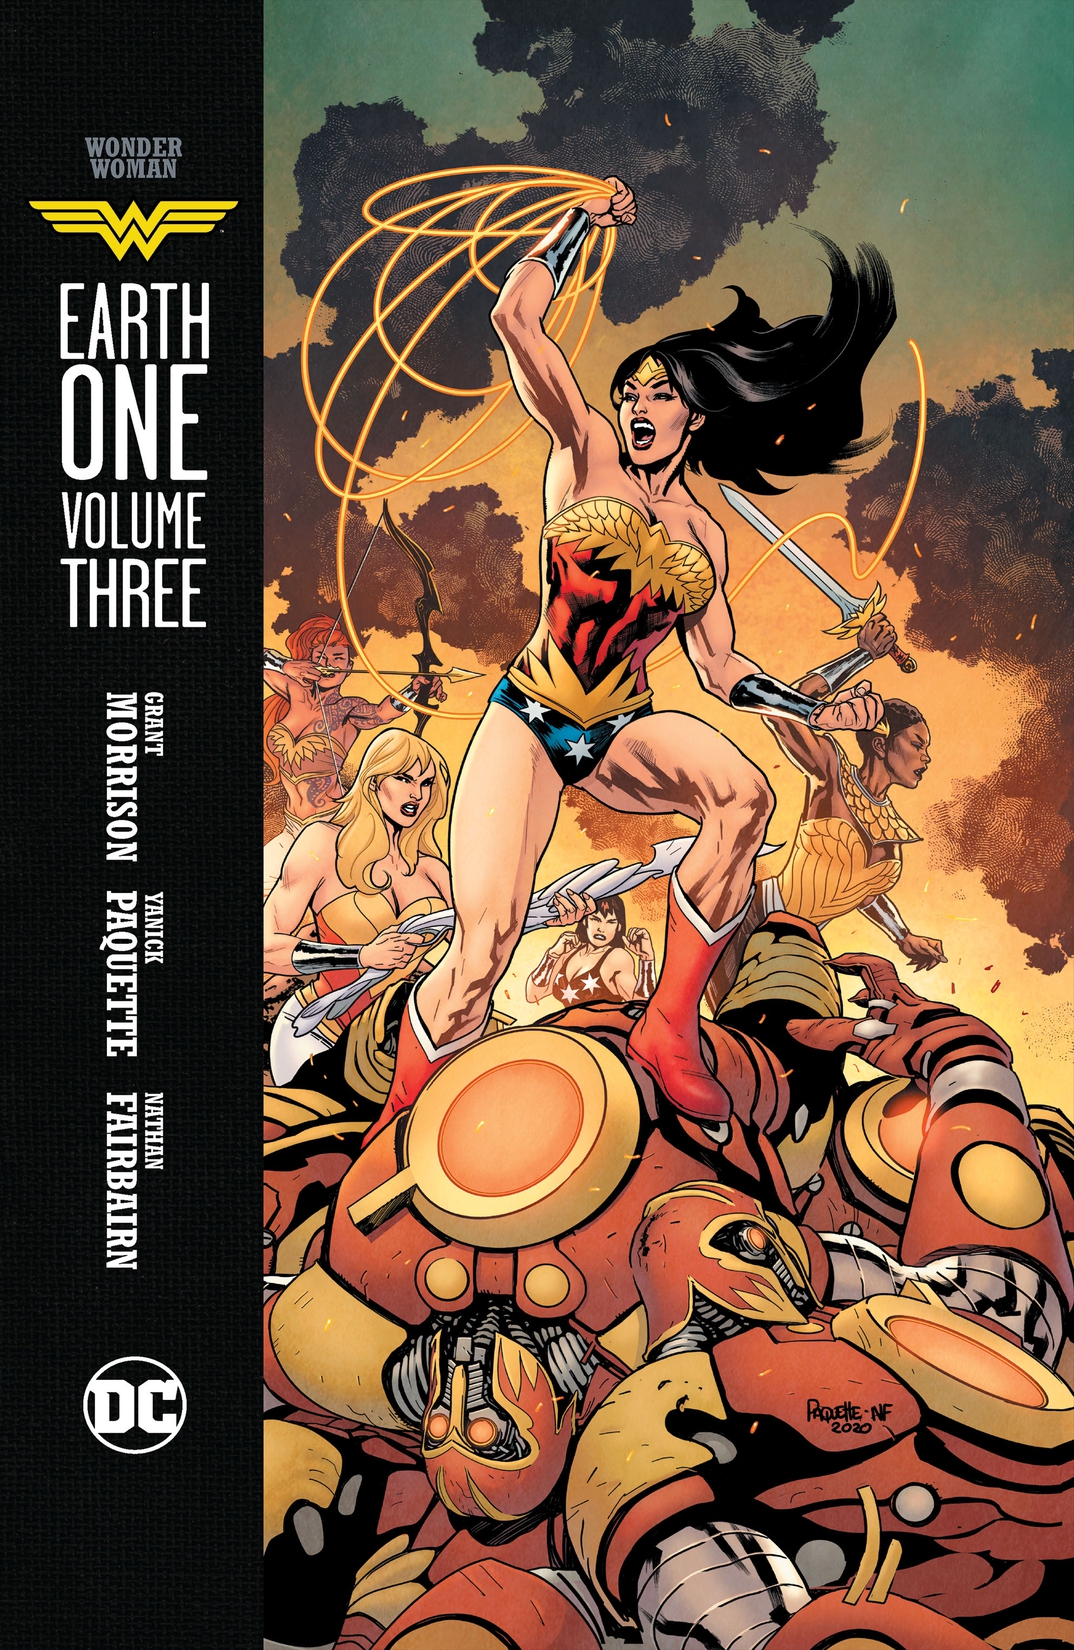 Wonder Woman: Earth One Vol. 3 preview images